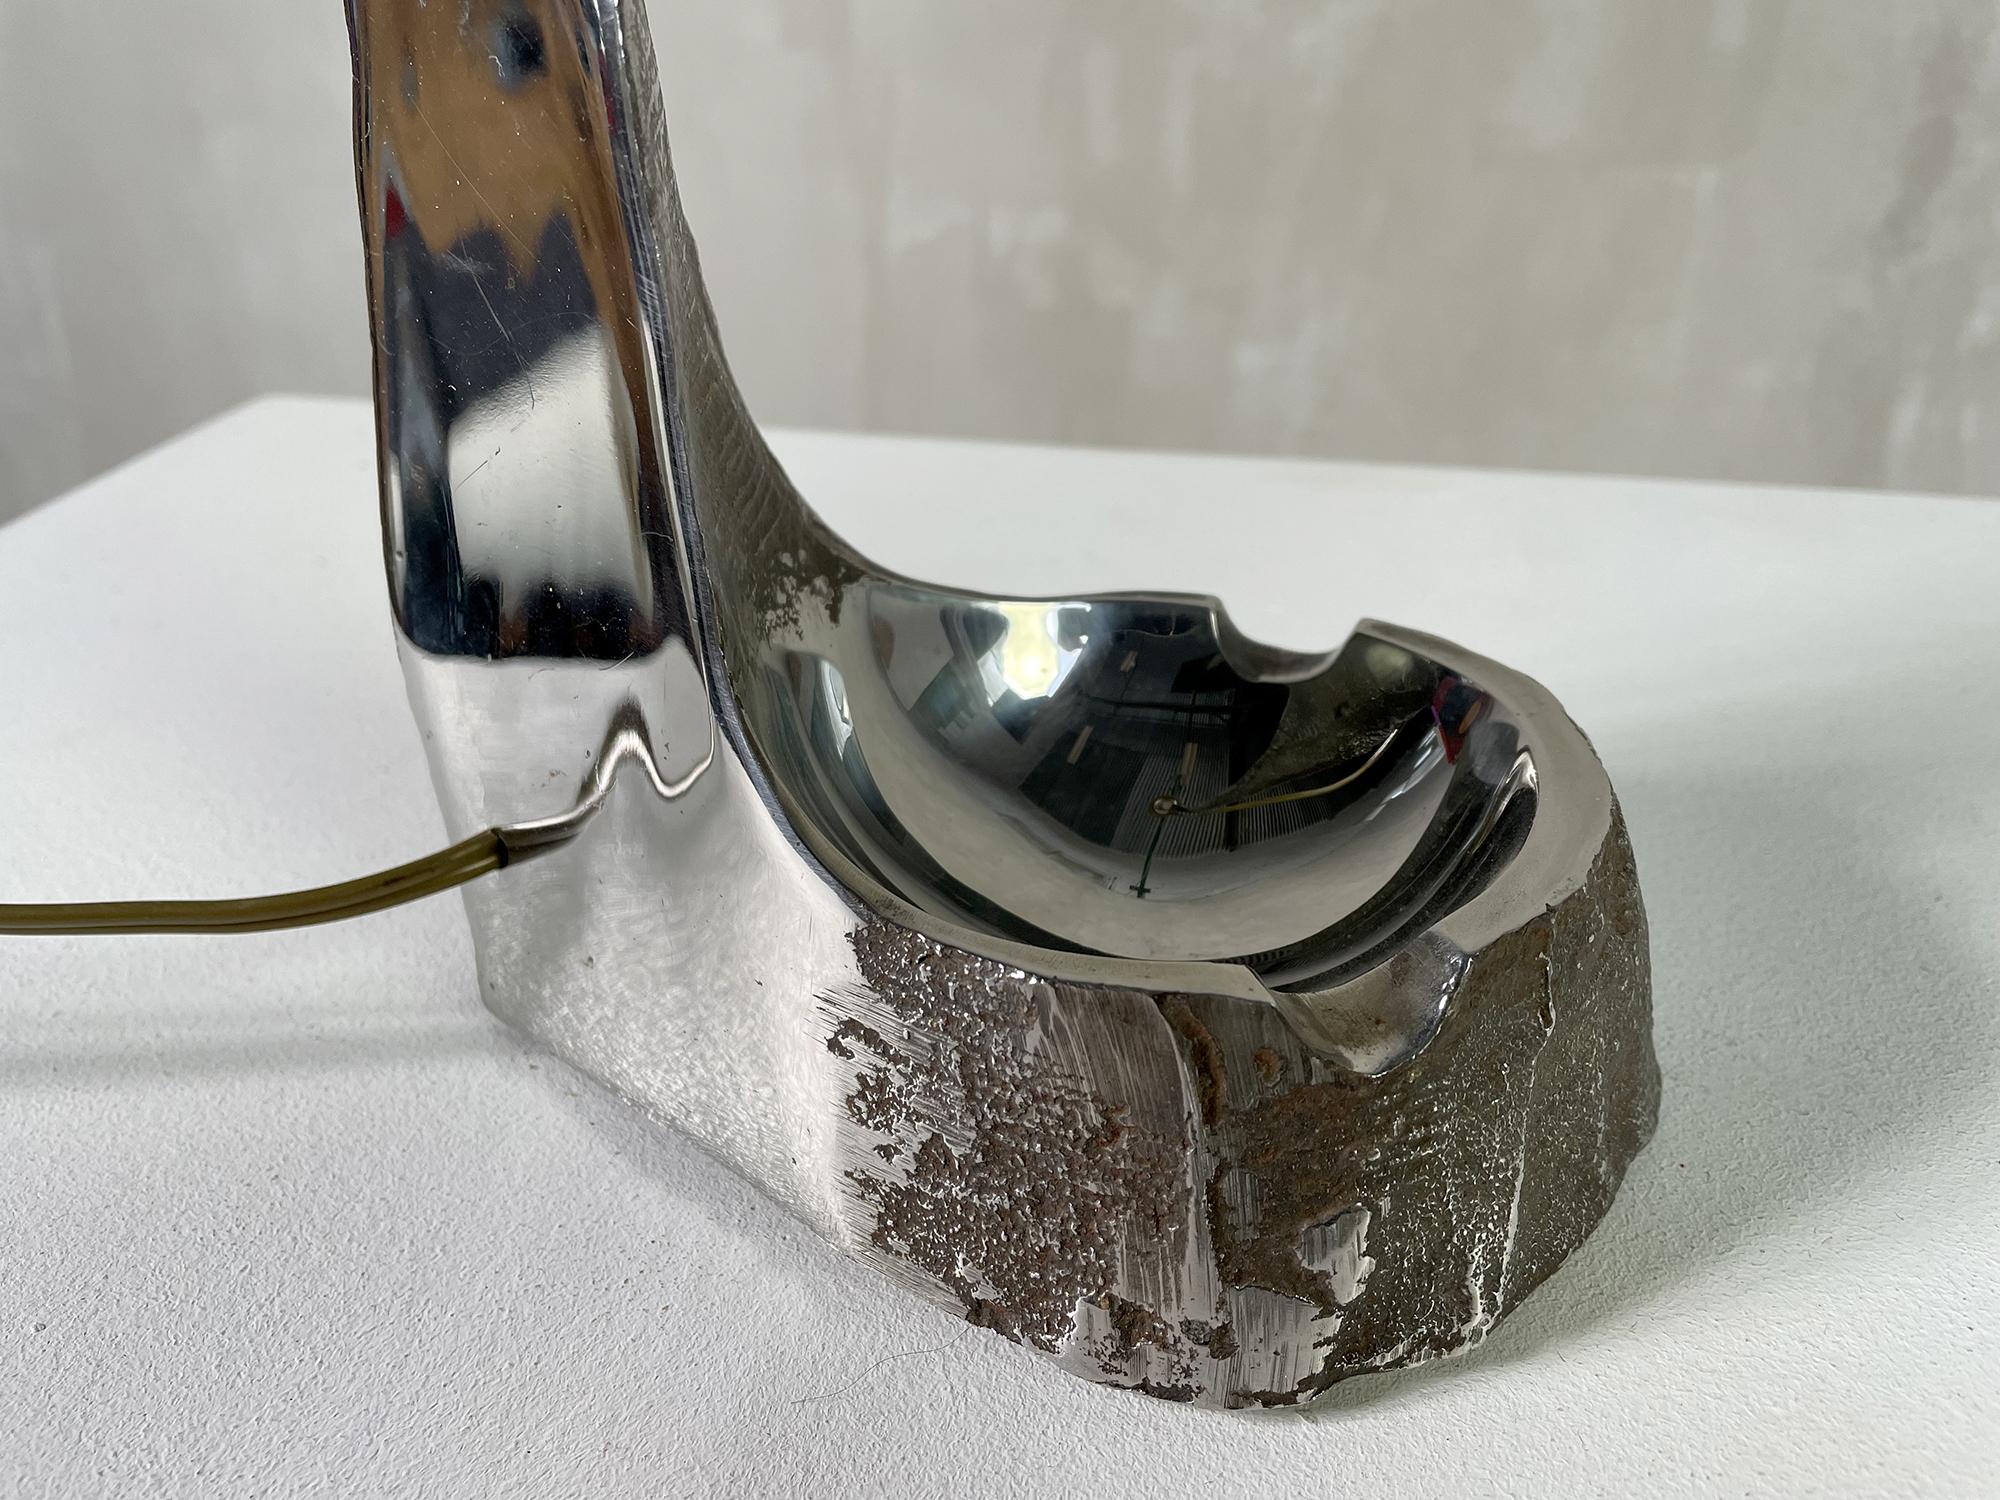 Large Brutalist lamp in solid stainless steel, France 1970. The block of metal has been worked in the mass, mirror polished on one side and raw on the other. A bowl/ashtray forms the base. This sculptural light is a unique piece.
Measure: height 63